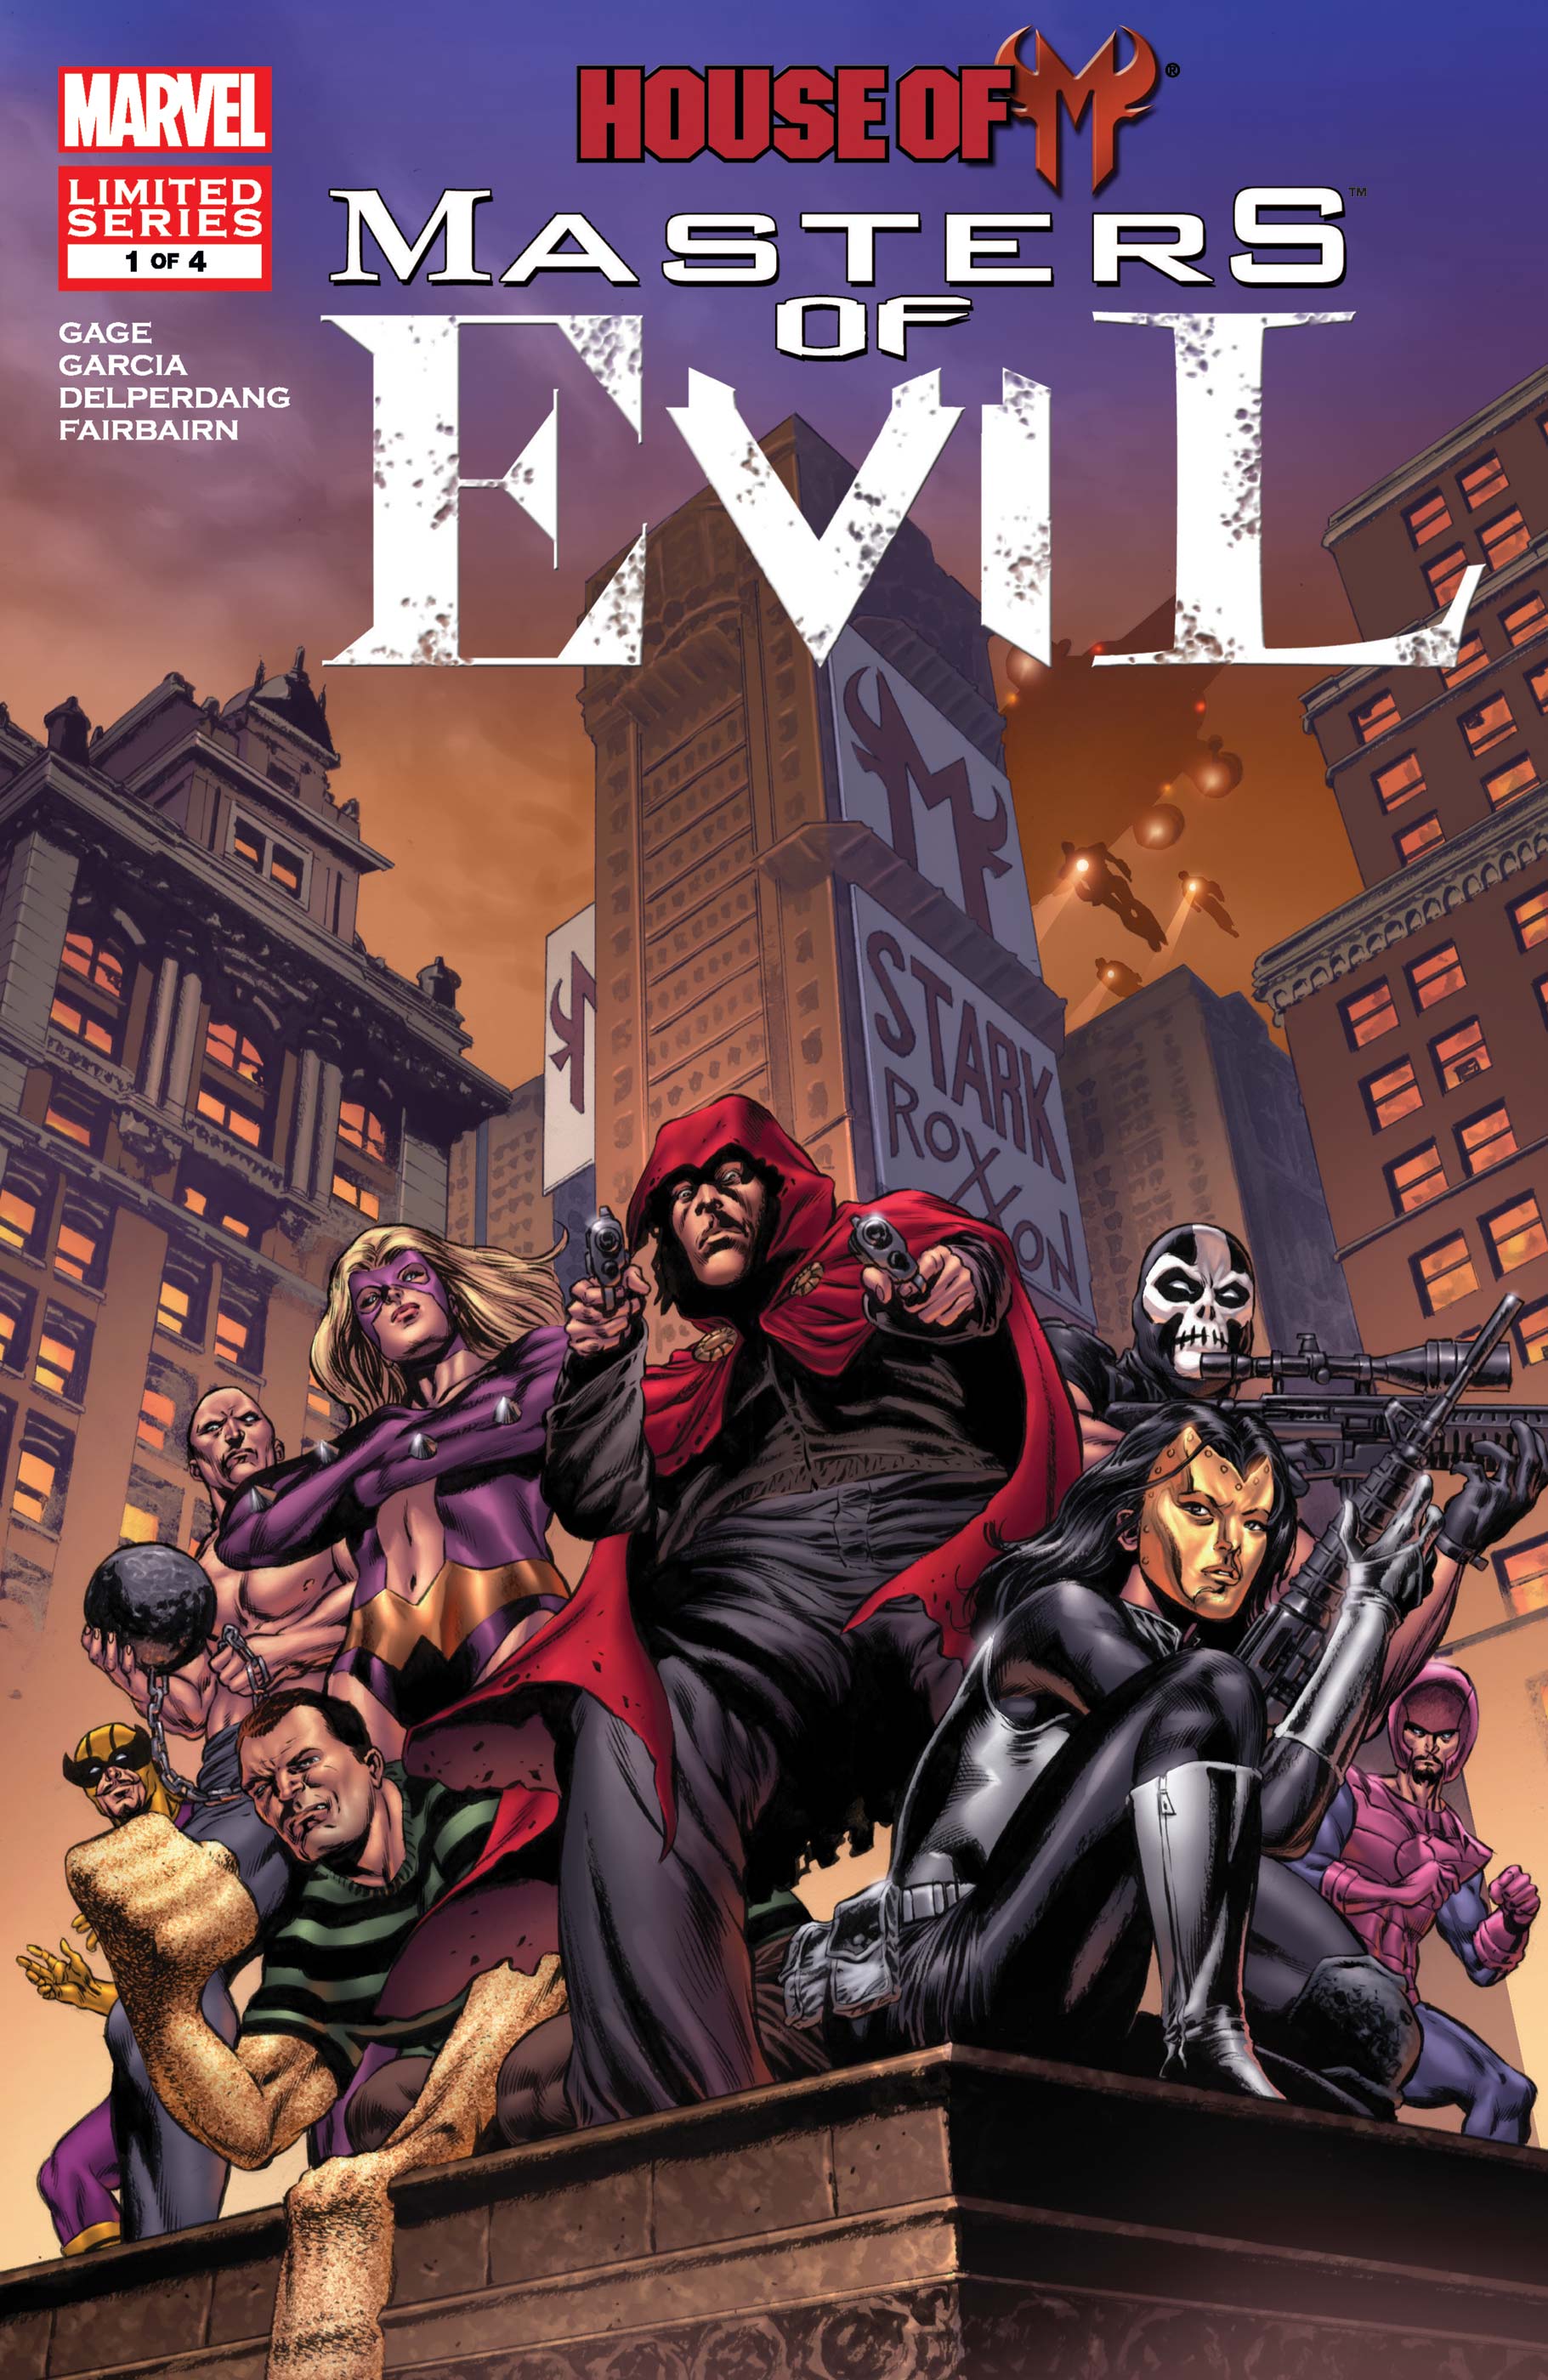 House of M: Masters of Evil (2009) #1